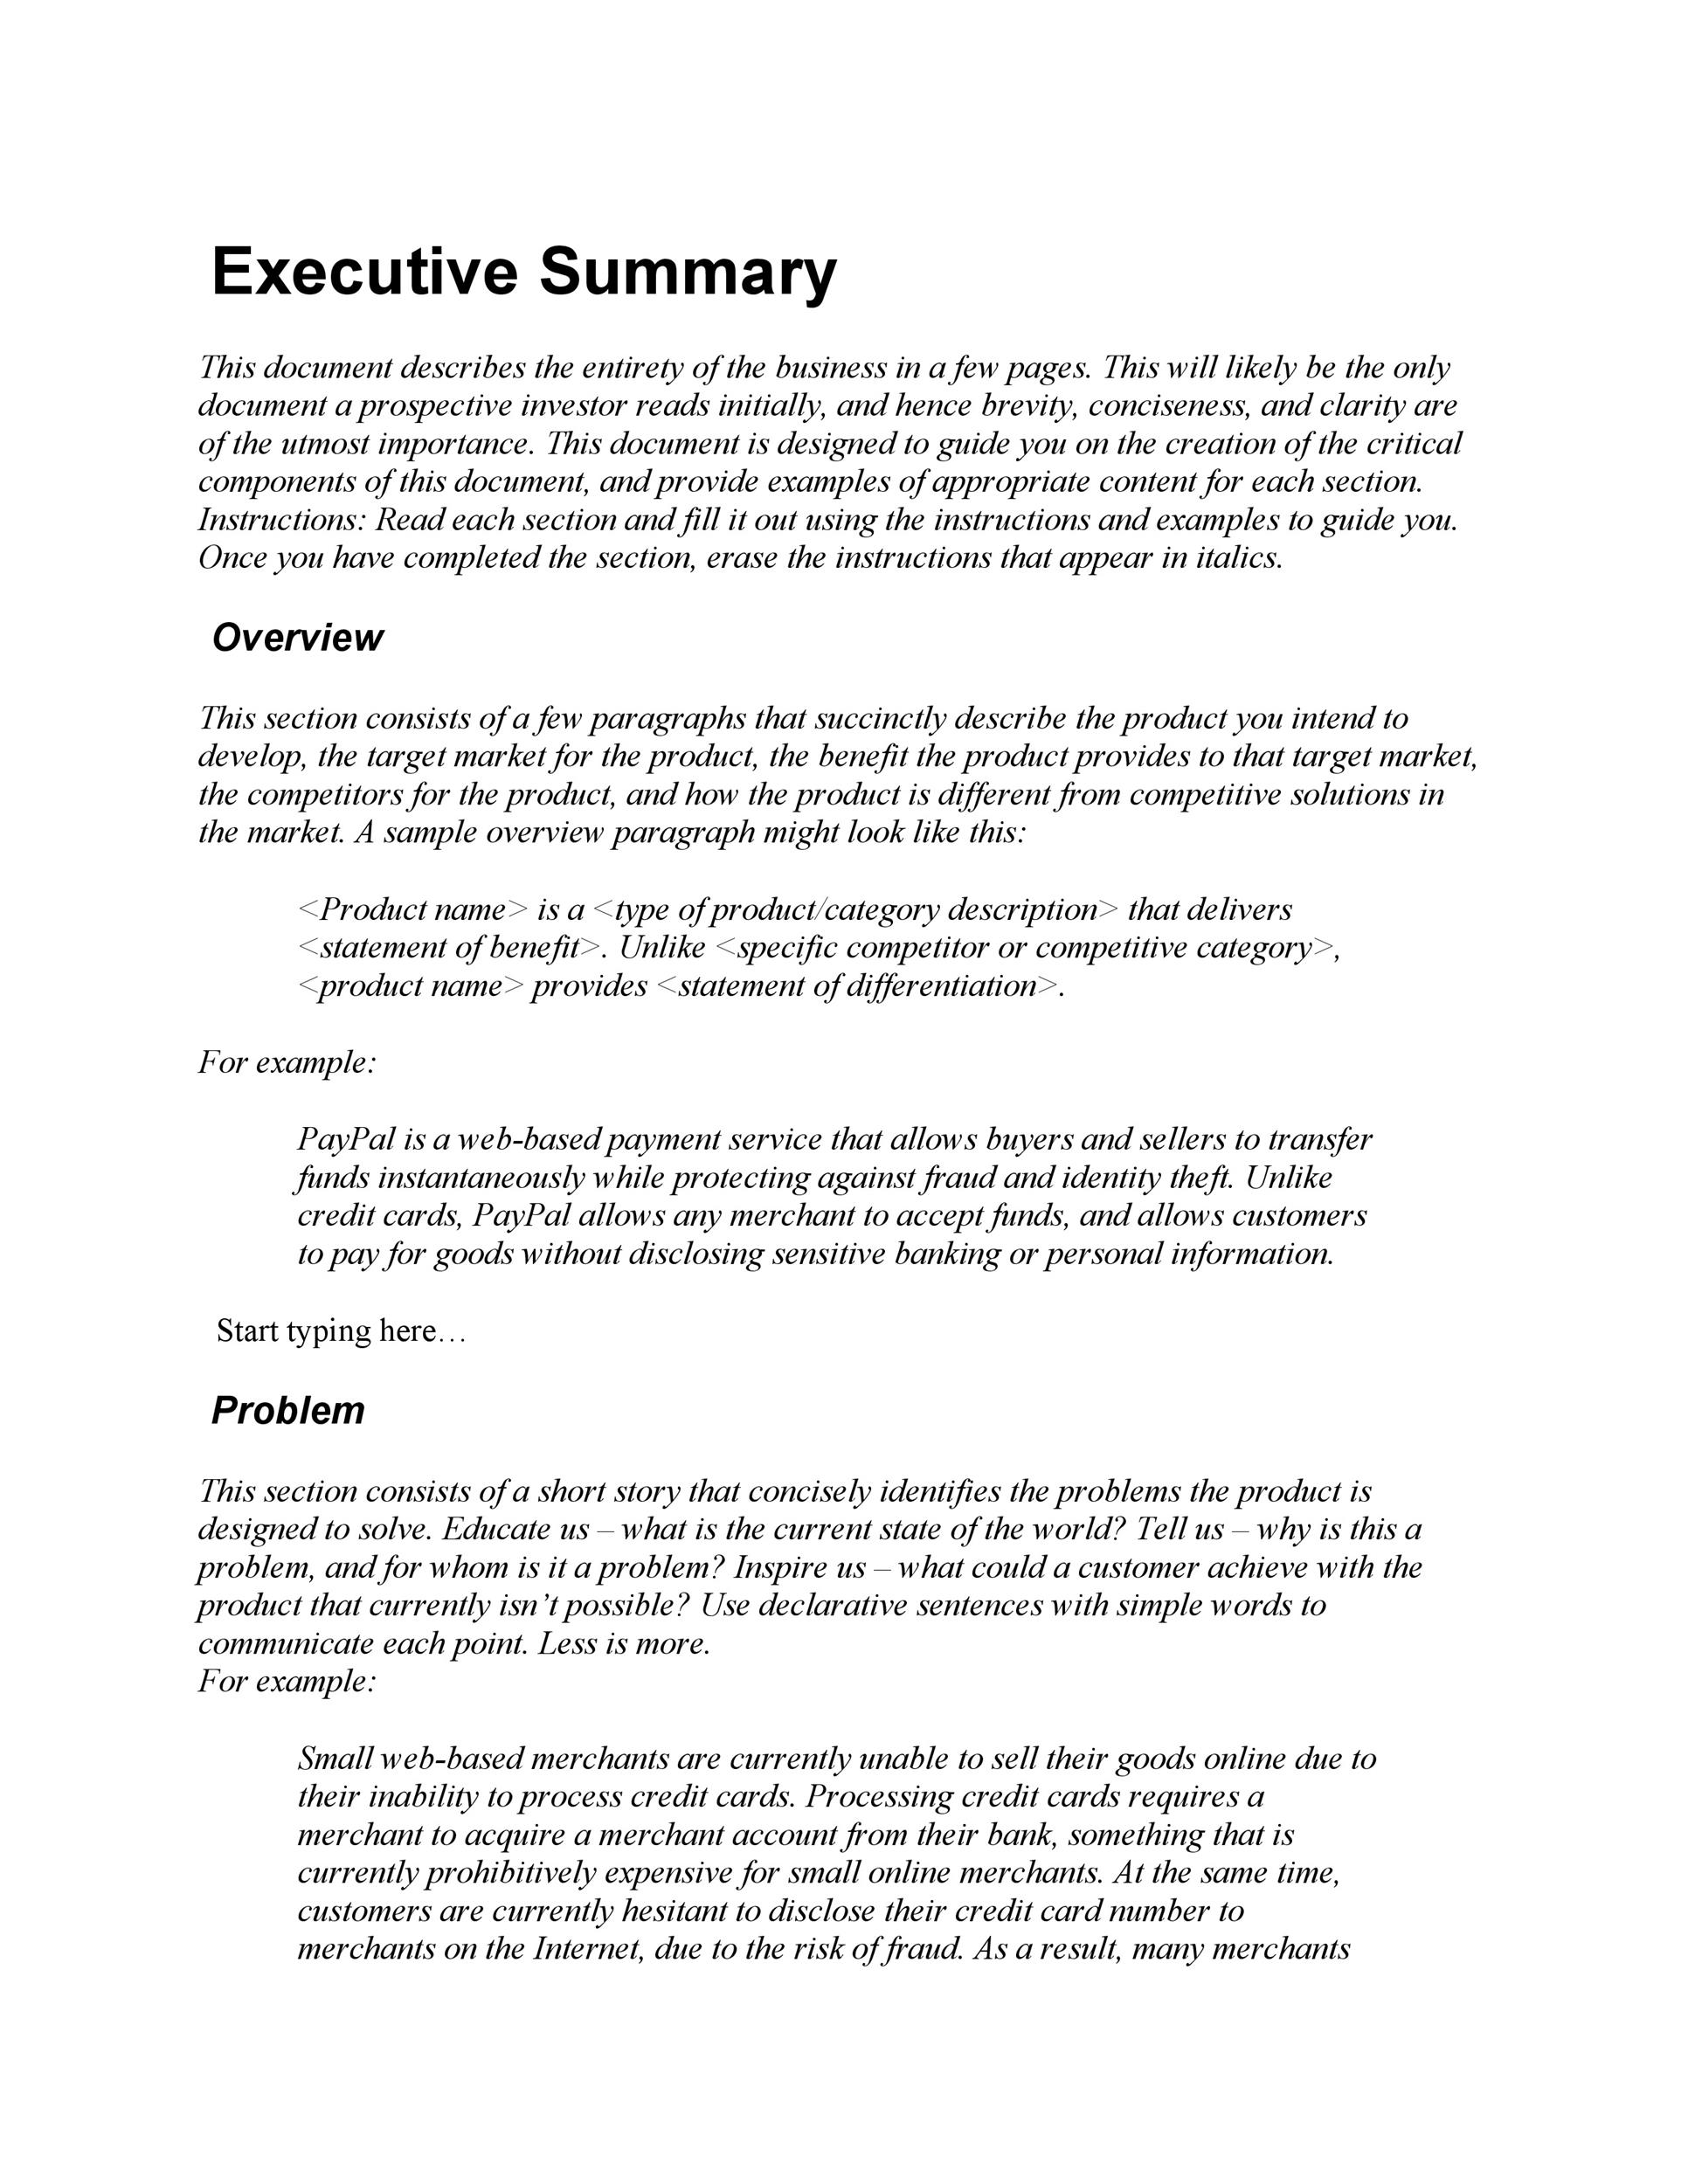 define executive summary of a business plan